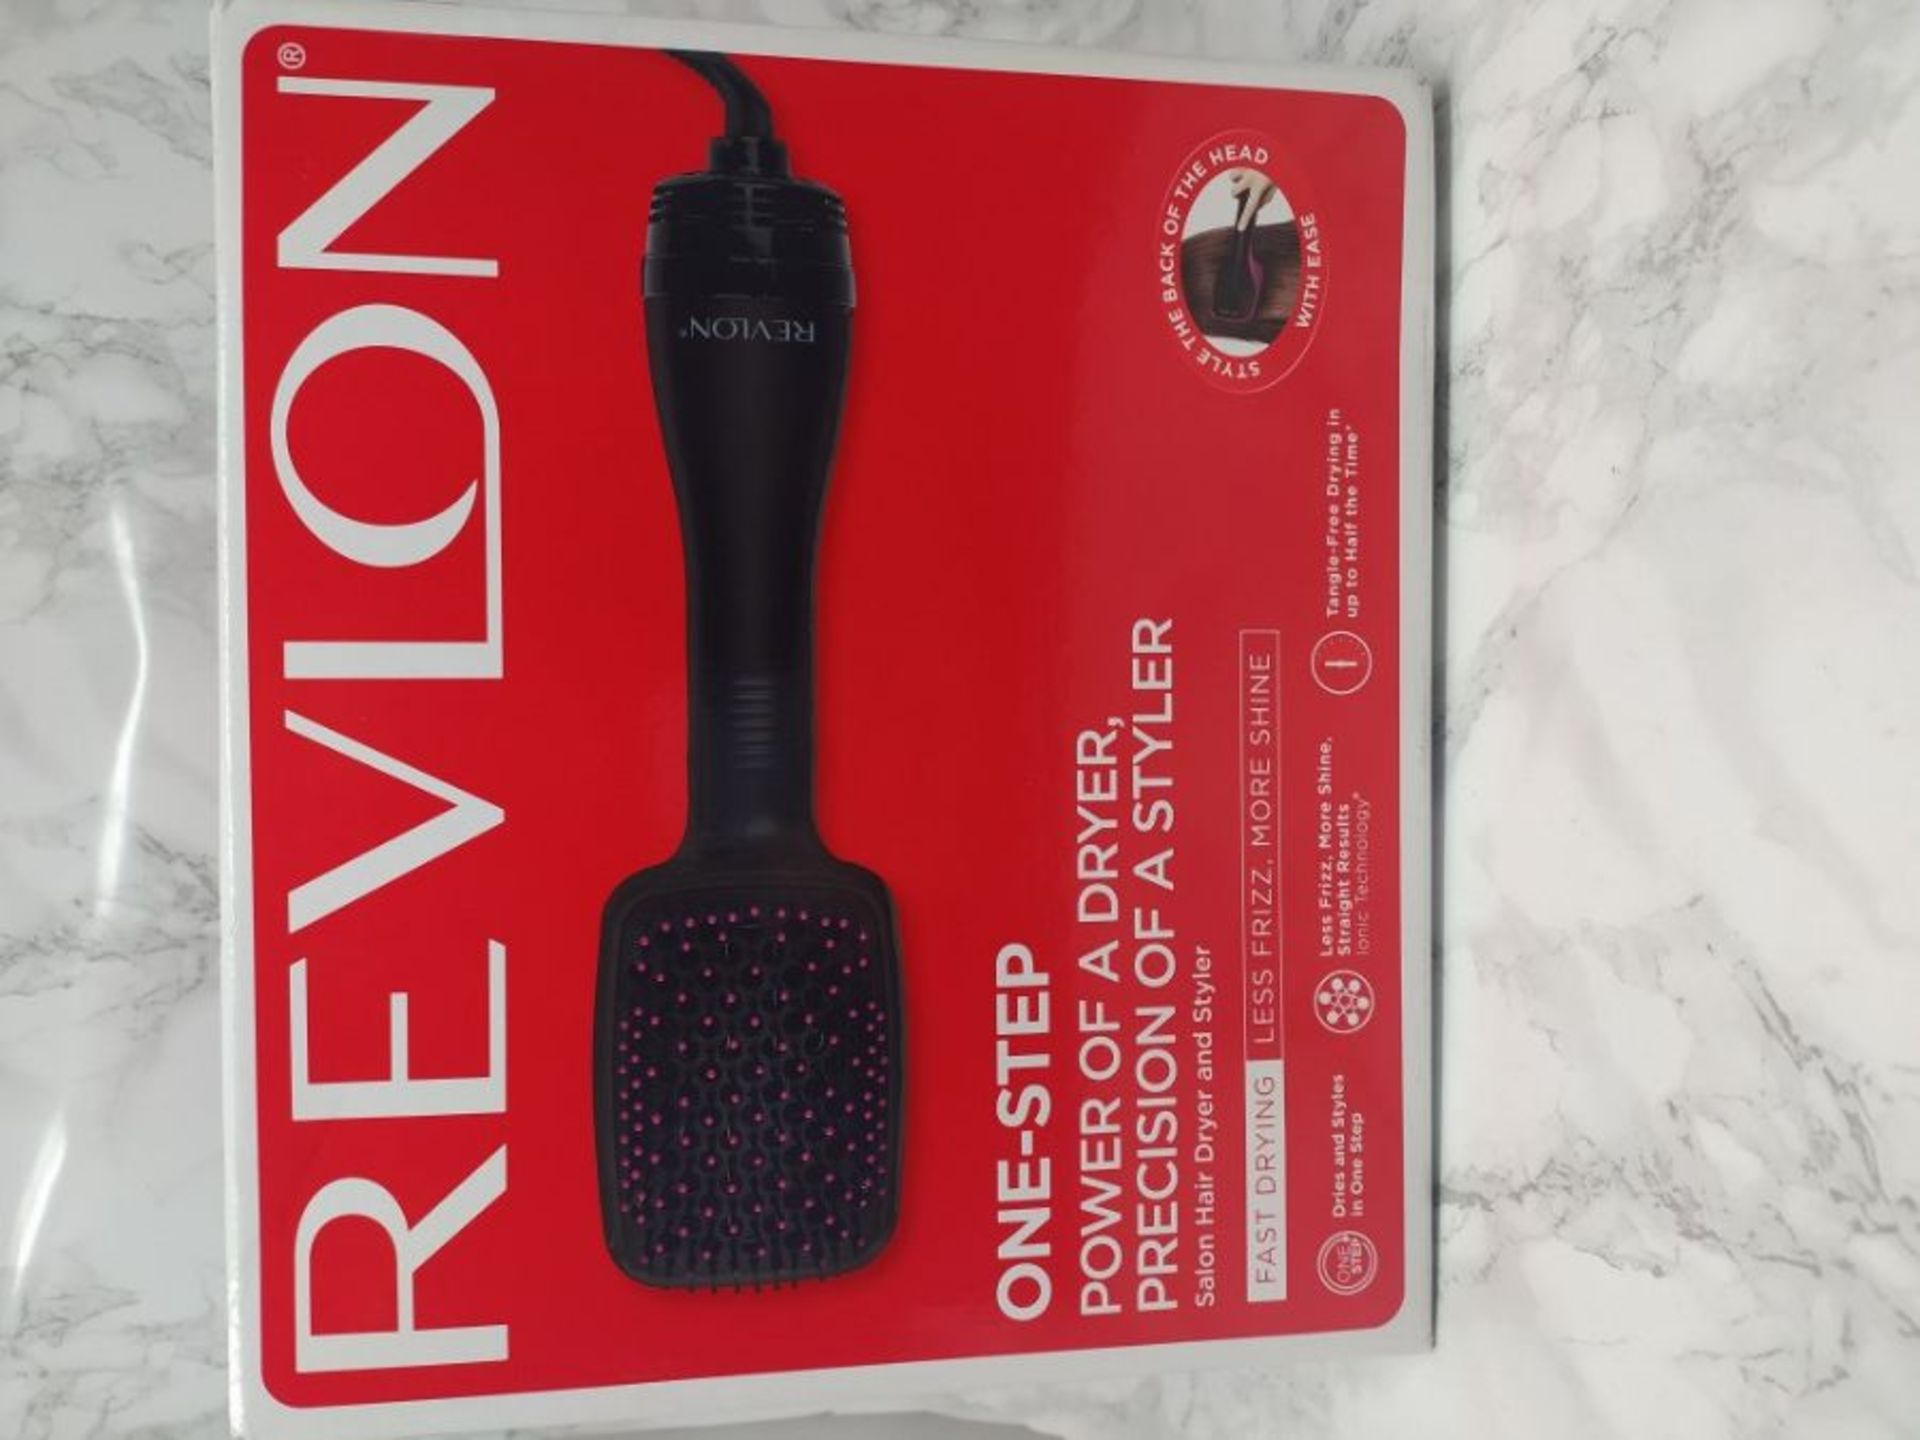 REVLON Pro Collection Salon One Step Hair Dryer and Styler - Image 2 of 3